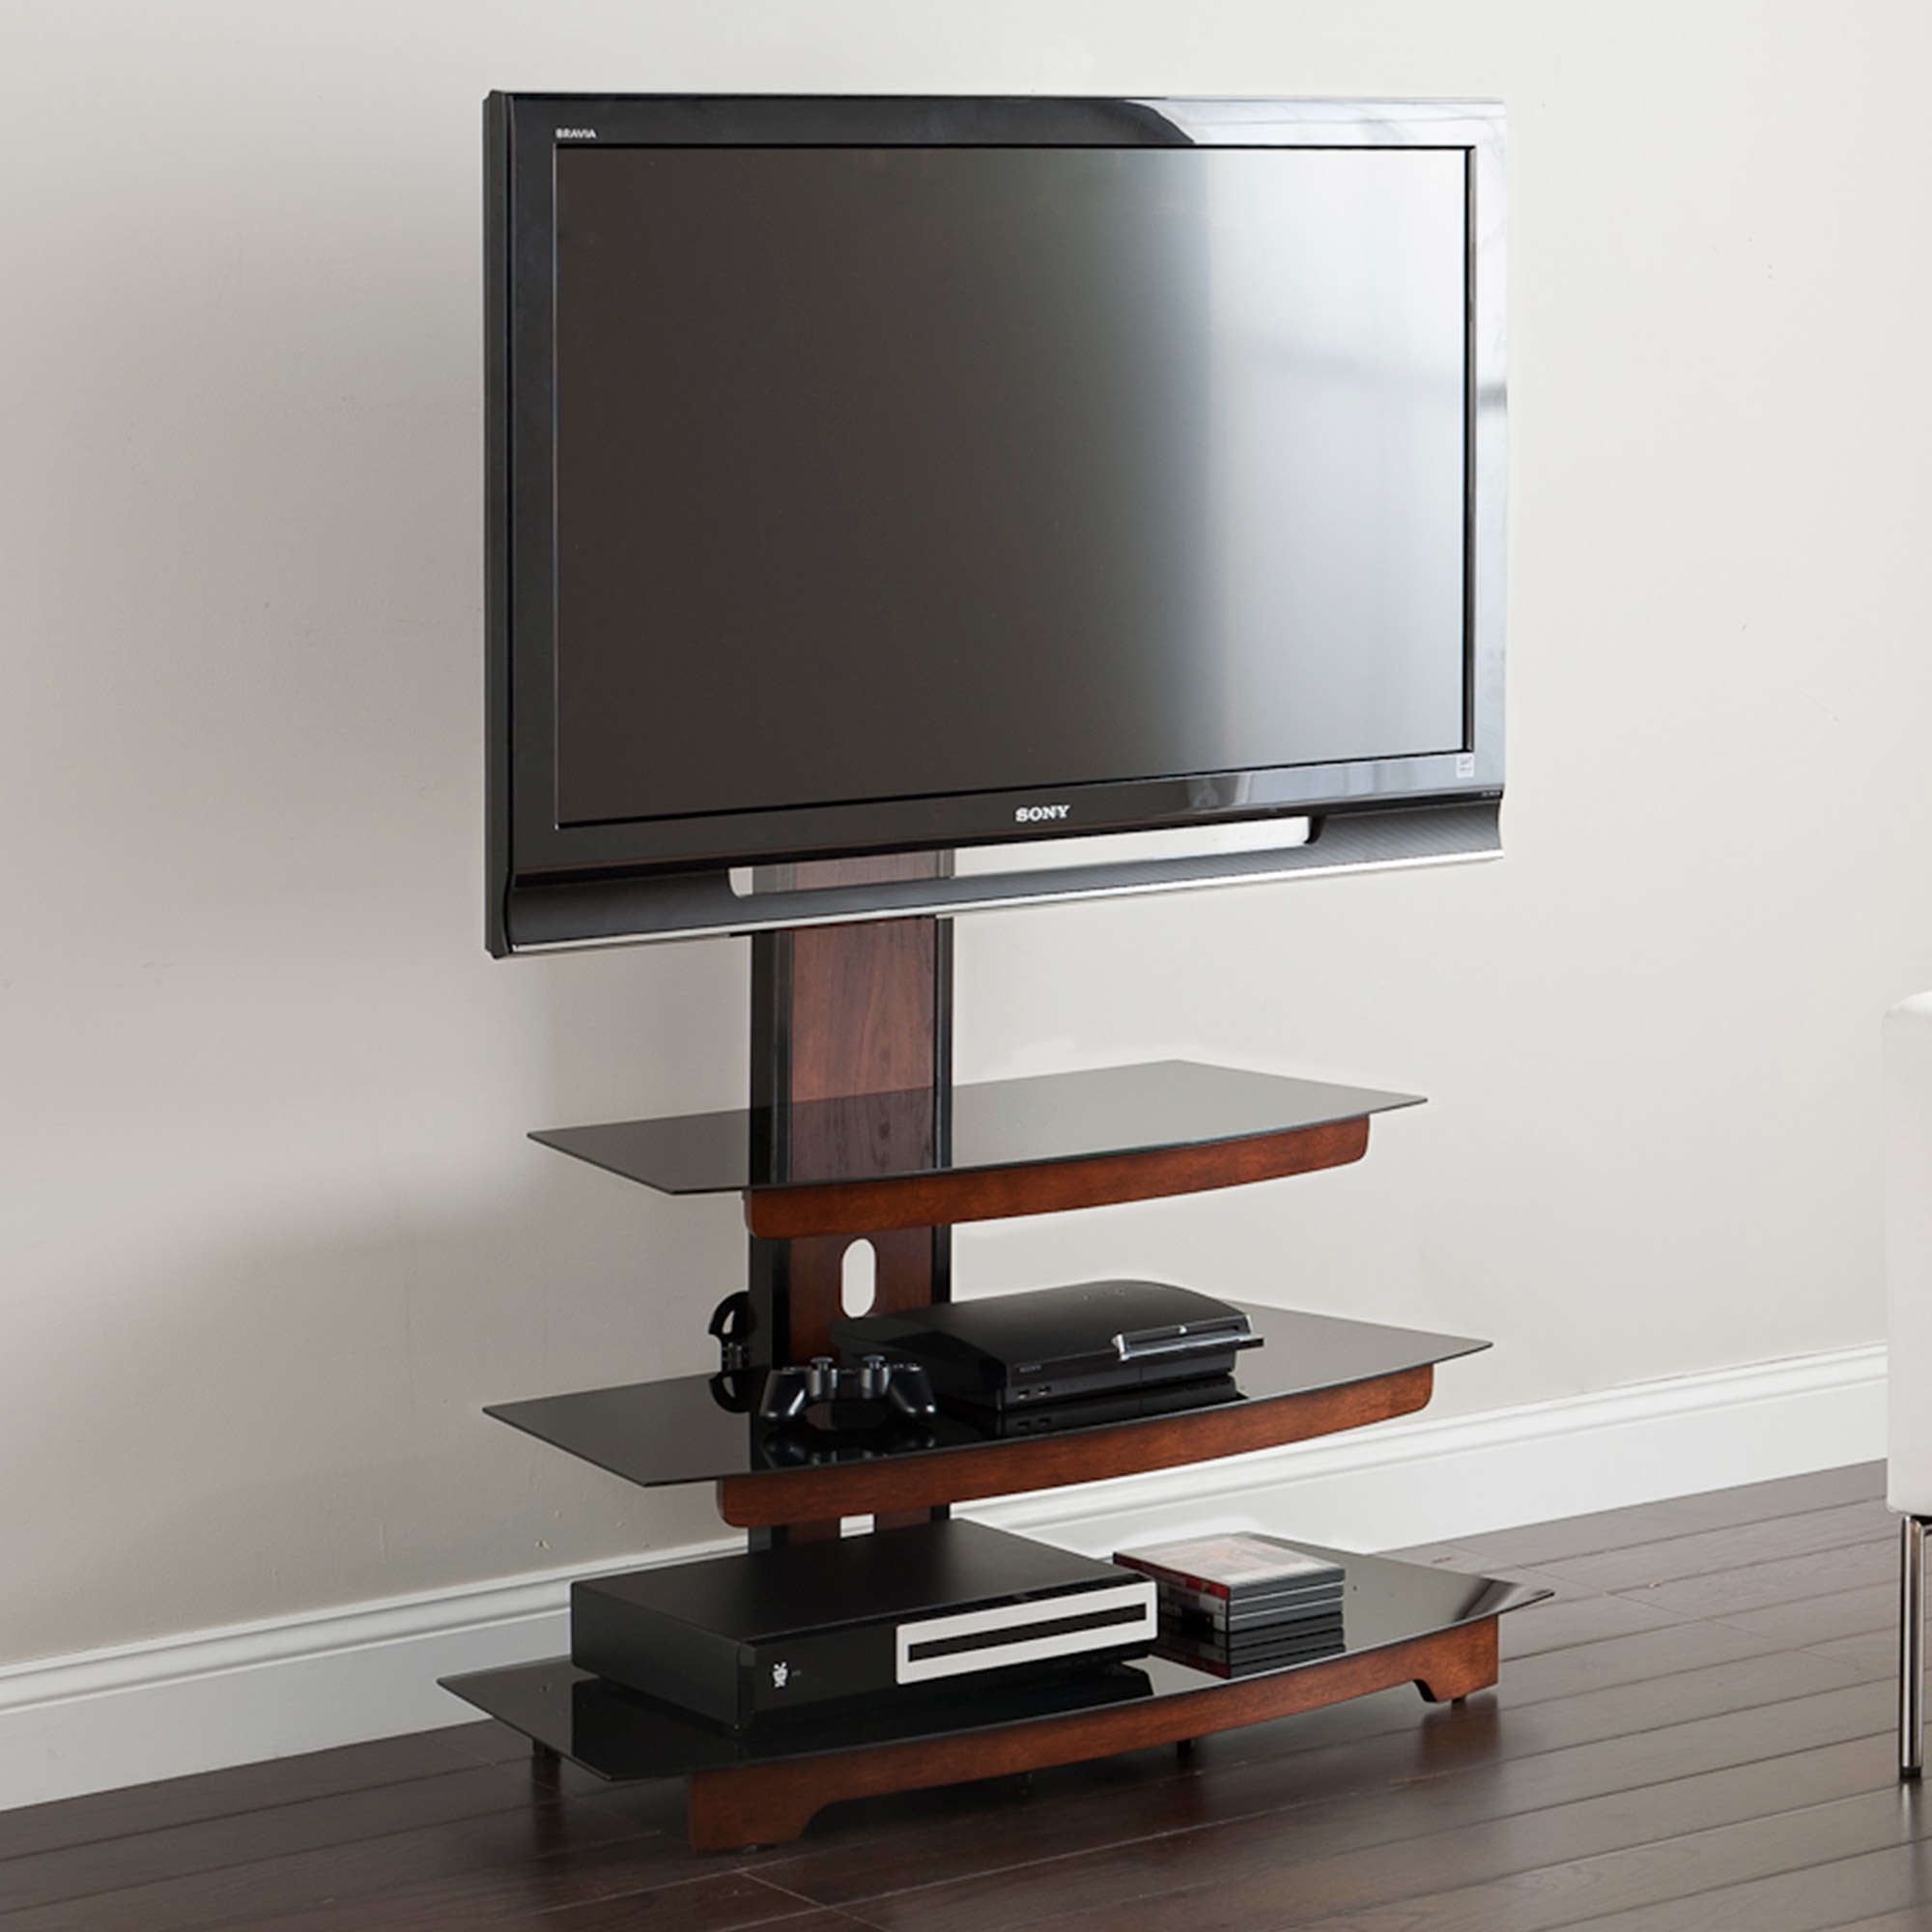 Whalen 3 Tier Television Stand For Tvs Up To 50", Perfect For Flat Screens,  Black Metal With Wood Trim Accent – Walmart With Regard To Tier Stands For Tvs (View 4 of 15)